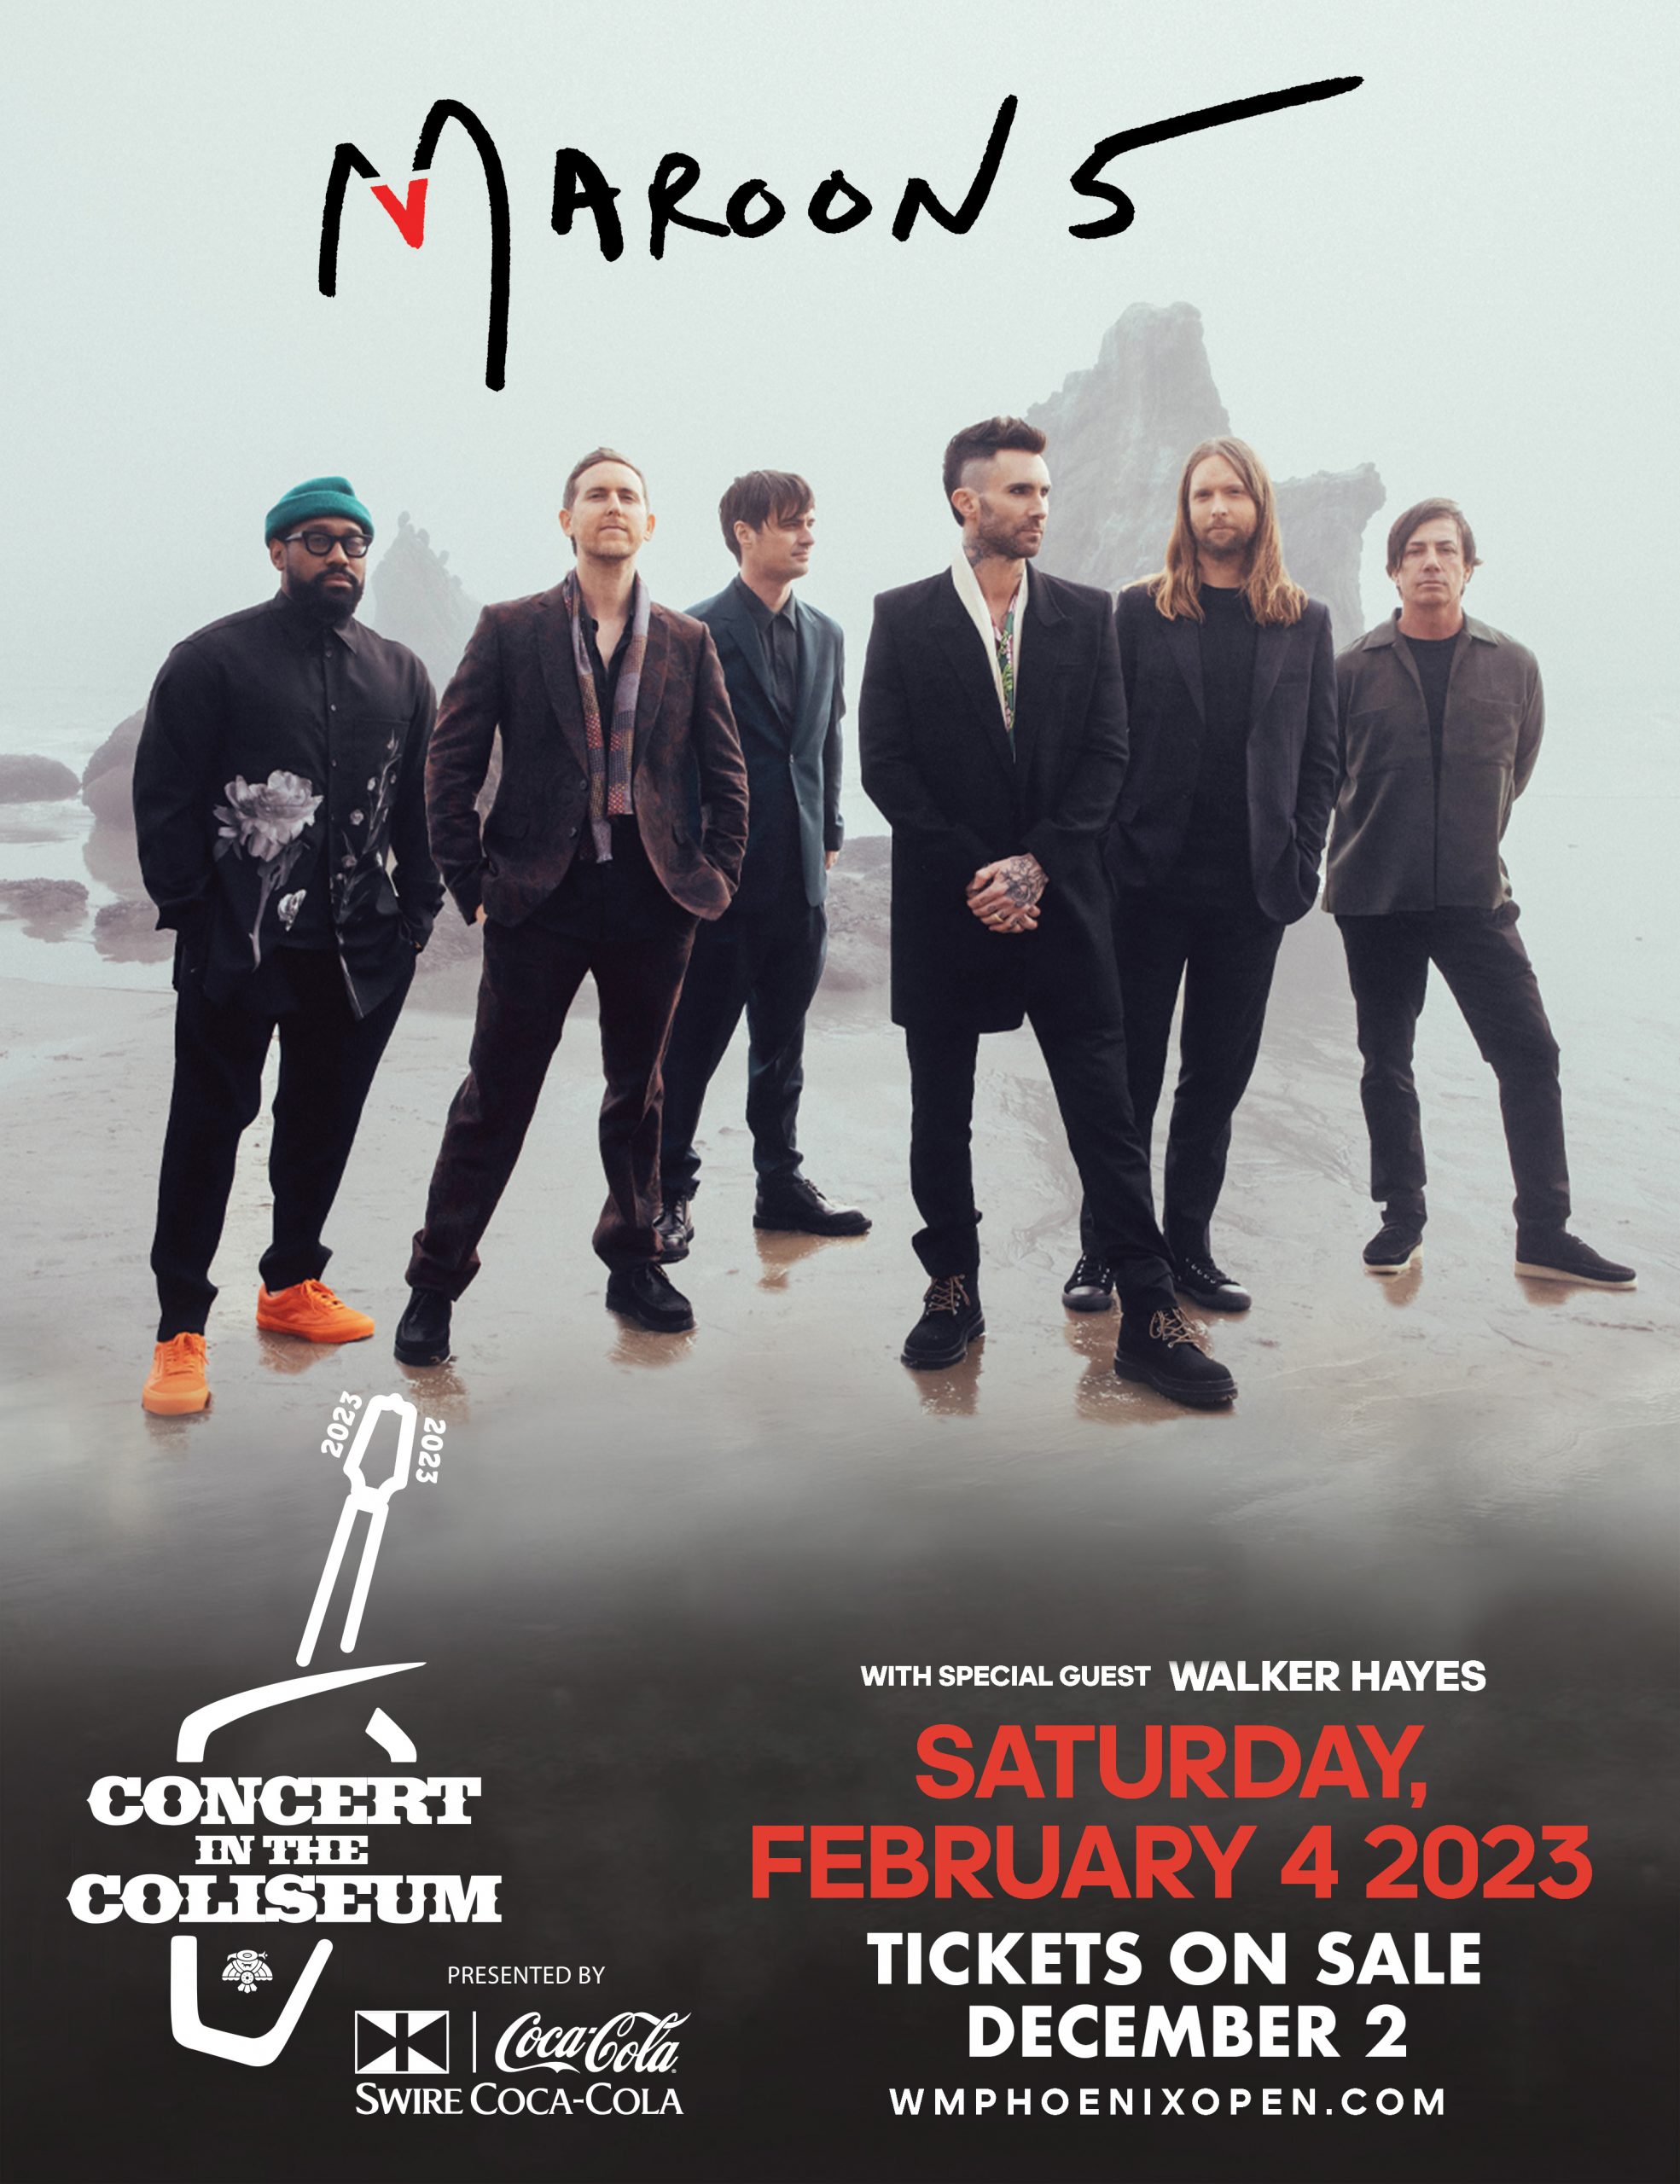 GRAMMYAWARD WINNING MAROON 5 TO TAKE THE STAGE AT THE ICONIC 16TH HOLE